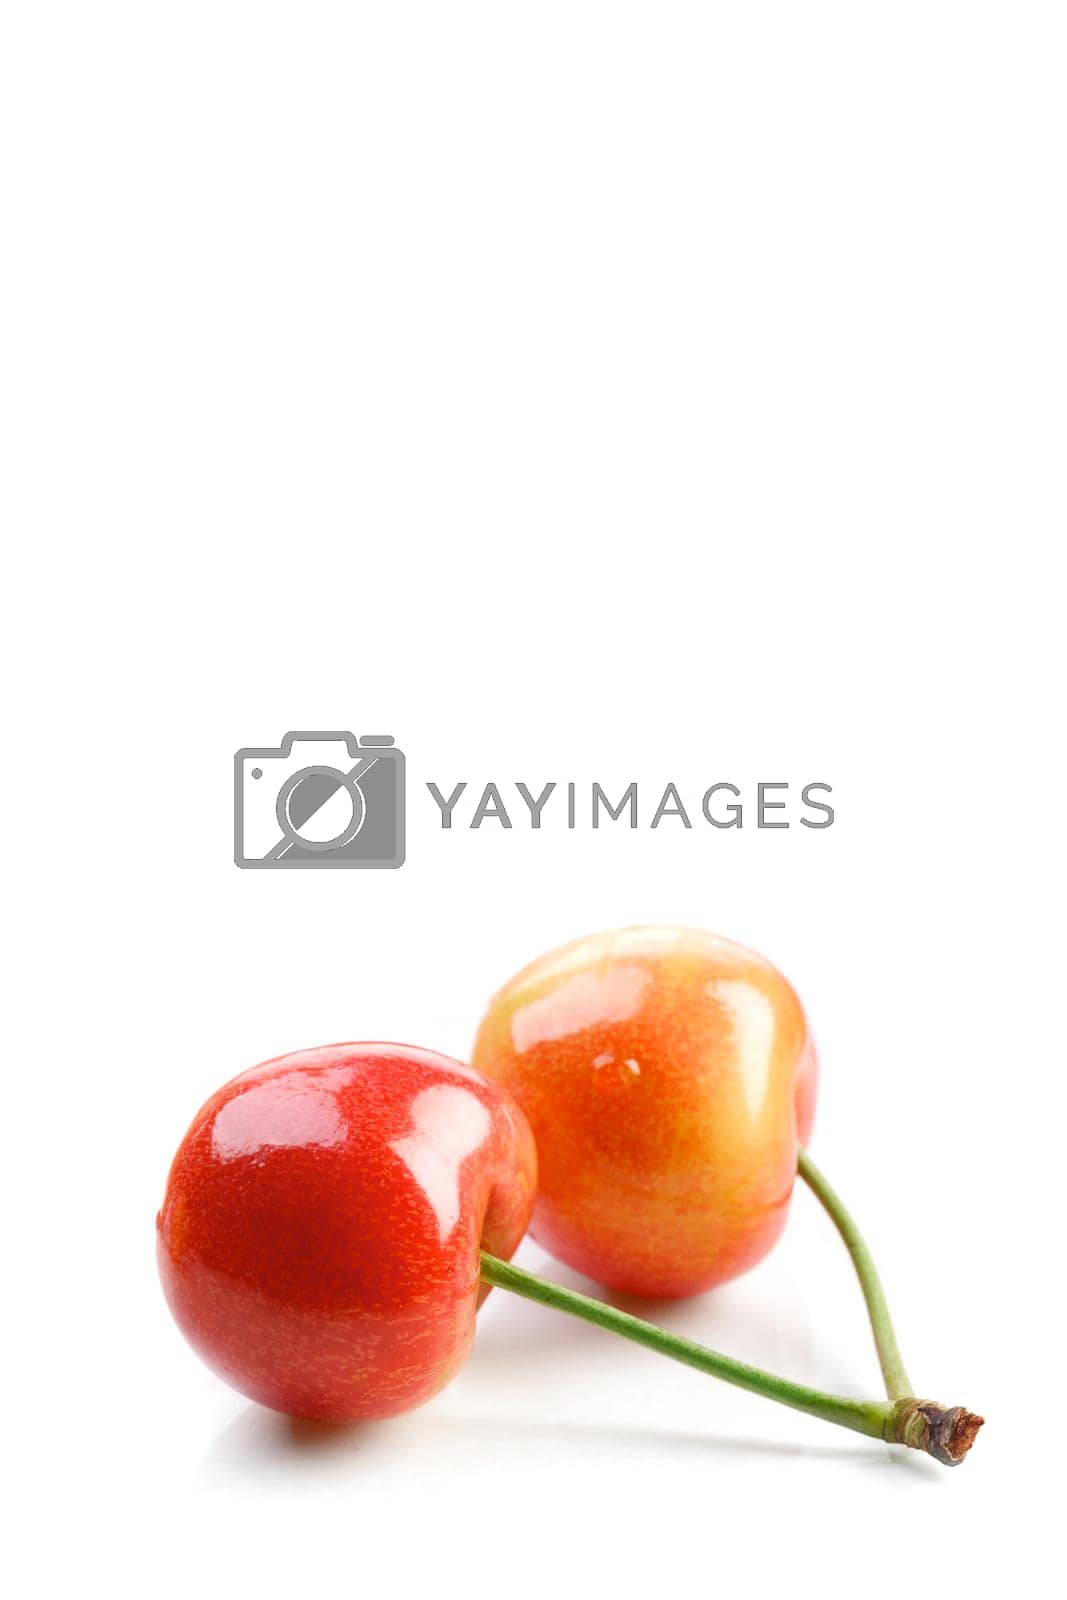 Royalty free image of Still life photography by moodboard